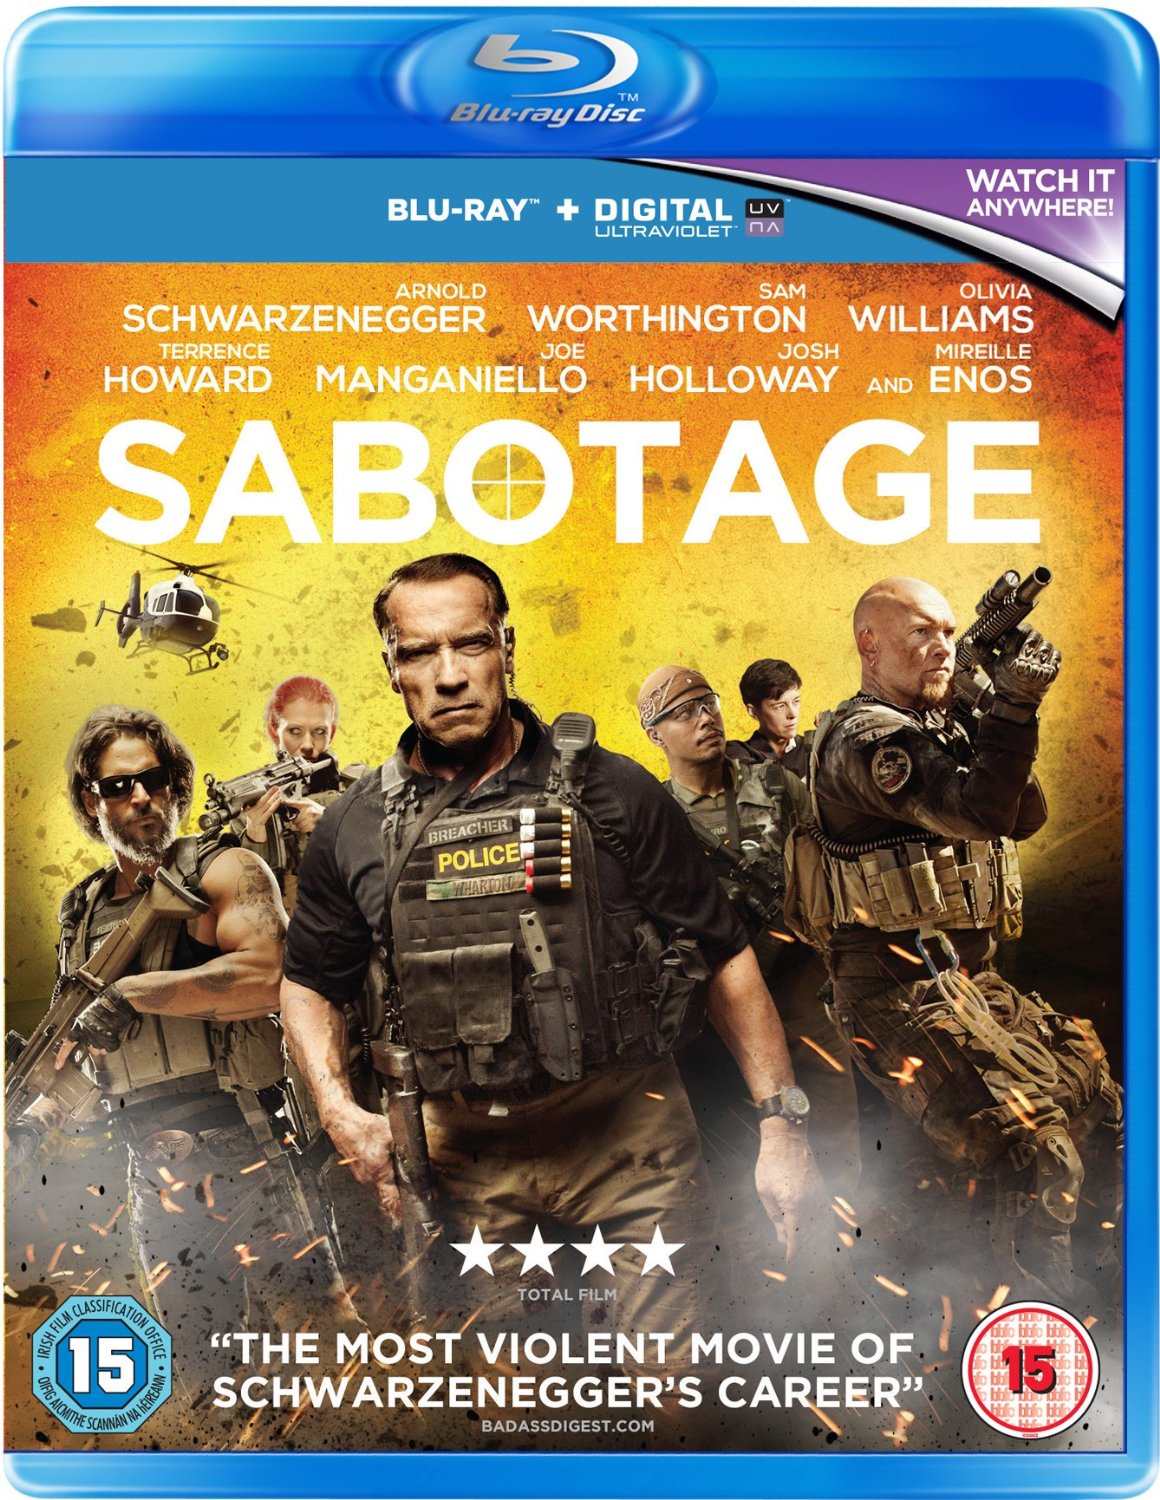 boom competitions - win a copy of Sabotage on blu-ray